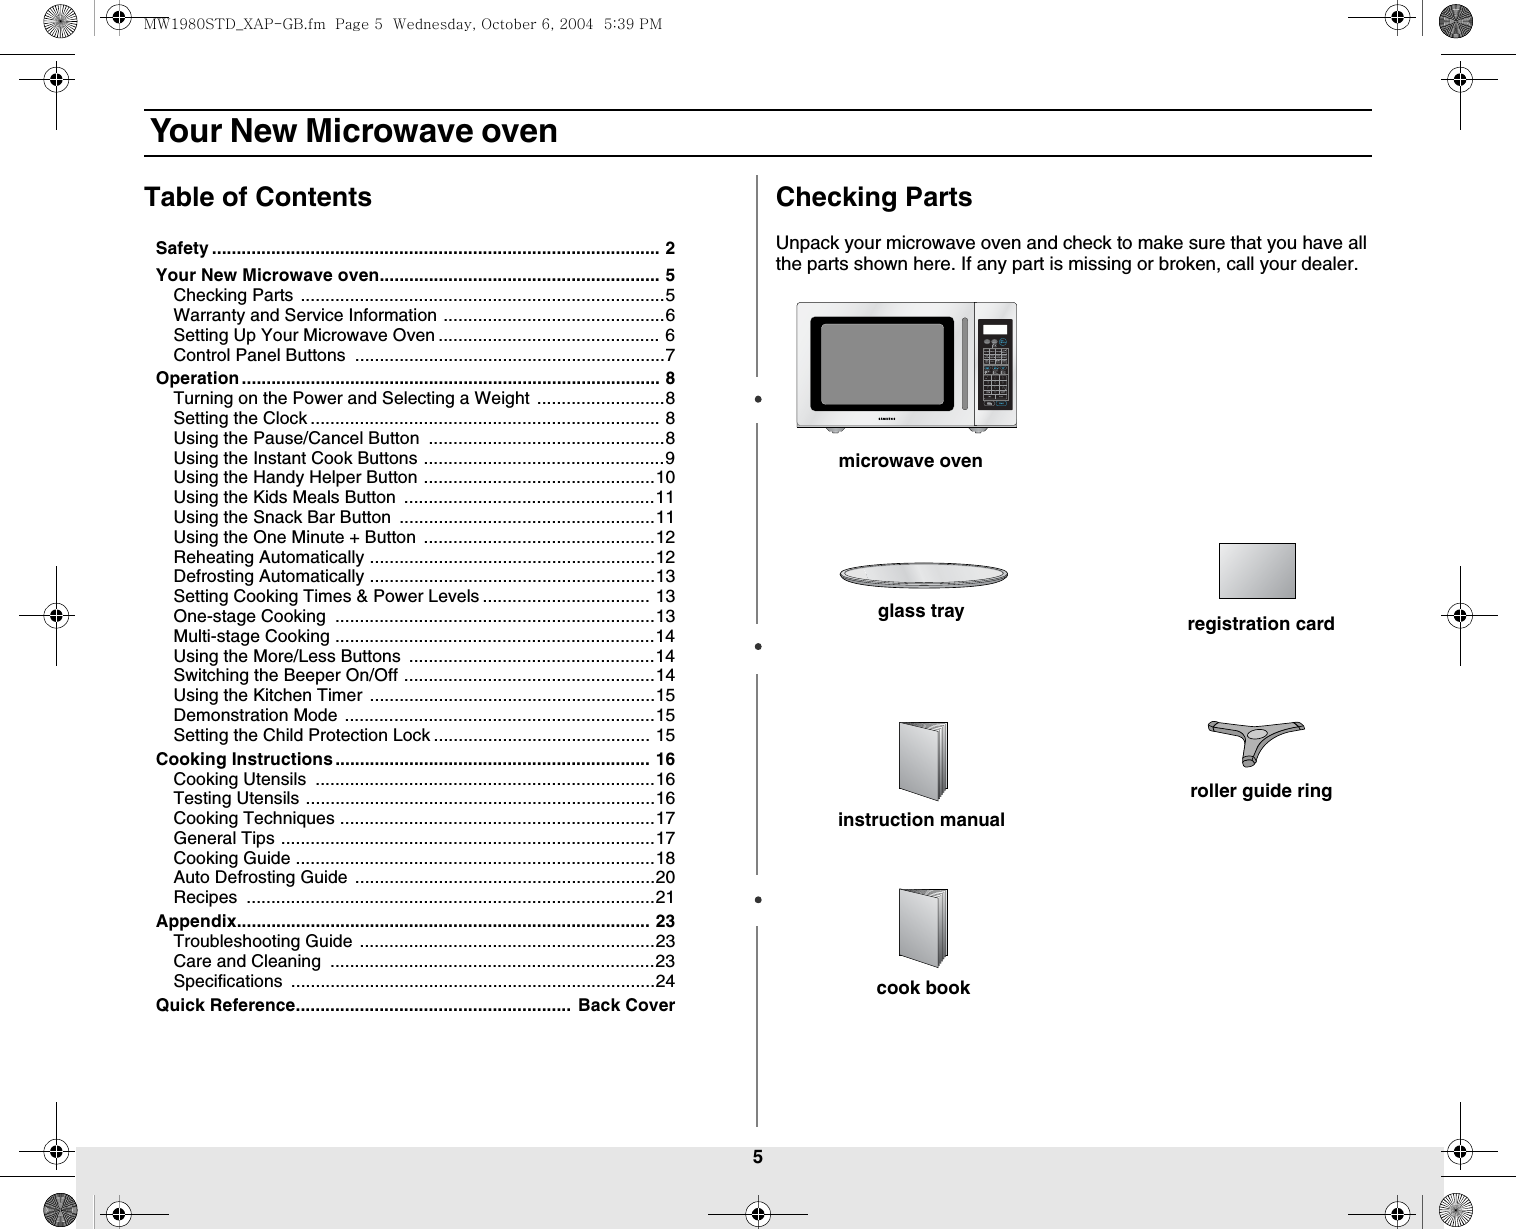 5 Your New Microwave ovenTable of ContentsSafety ........................................................................................... 2Your New Microwave oven......................................................... 5Checking Parts ..........................................................................5Warranty and Service Information .............................................6Setting Up Your Microwave Oven ............................................. 6Control Panel Buttons  ...............................................................7Operation..................................................................................... 8Turning on the Power and Selecting a Weight ..........................8Setting the Clock ....................................................................... 8Using the Pause/Cancel Button  ................................................8Using the Instant Cook Buttons .................................................9Using the Handy Helper Button ...............................................10Using the Kids Meals Button  ...................................................11Using the Snack Bar Button  ....................................................11Using the One Minute + Button  ...............................................12Reheating Automatically ..........................................................12Defrosting Automatically ..........................................................13Setting Cooking Times &amp; Power Levels .................................. 13One-stage Cooking  .................................................................13Multi-stage Cooking .................................................................14Using the More/Less Buttons  ..................................................14Switching the Beeper On/Off ...................................................14Using the Kitchen Timer ..........................................................15Demonstration Mode ...............................................................15Setting the Child Protection Lock ............................................ 15Cooking Instructions................................................................ 16Cooking Utensils  .....................................................................16Testing Utensils .......................................................................16Cooking Techniques ................................................................17General Tips ............................................................................17Cooking Guide .........................................................................18Auto Defrosting Guide .............................................................20Recipes ...................................................................................21Appendix.................................................................................... 23Troubleshooting Guide ............................................................23Care and Cleaning  ..................................................................23Specifications ..........................................................................24Quick Reference........................................................ Back CoverChecking PartsUnpack your microwave oven and check to make sure that you have all the parts shown here. If any part is missing or broken, call your dealer.microwave ovenglass trayinstruction manualregistration cardroller guide ringcook bookMW1980STD_XAP-GB.fm  Page 5  Wednesday, October 6, 2004  5:39 PM